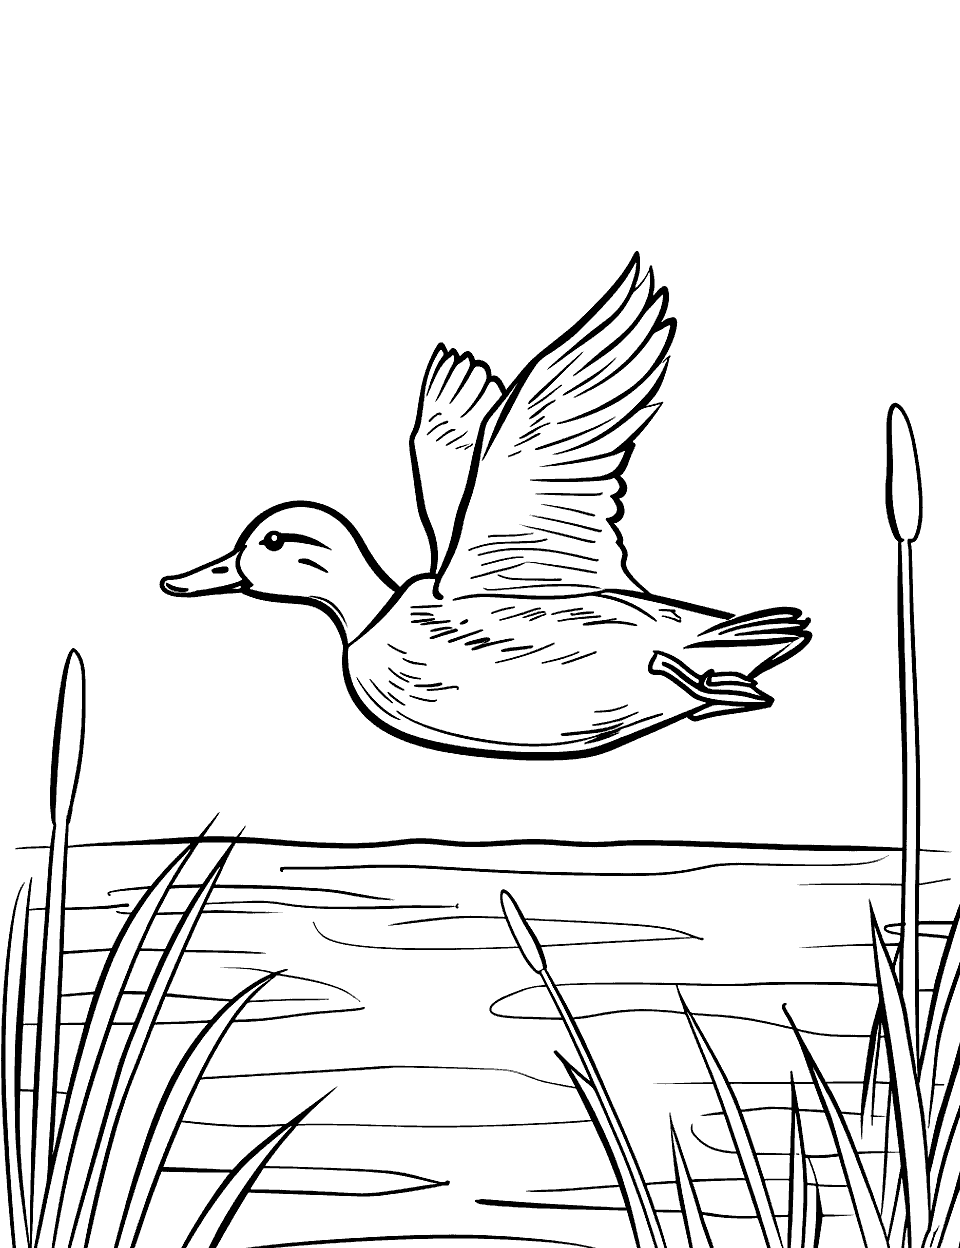 Duck Hunting Scene Coloring Page - A simple duck flying across the early morning sky.